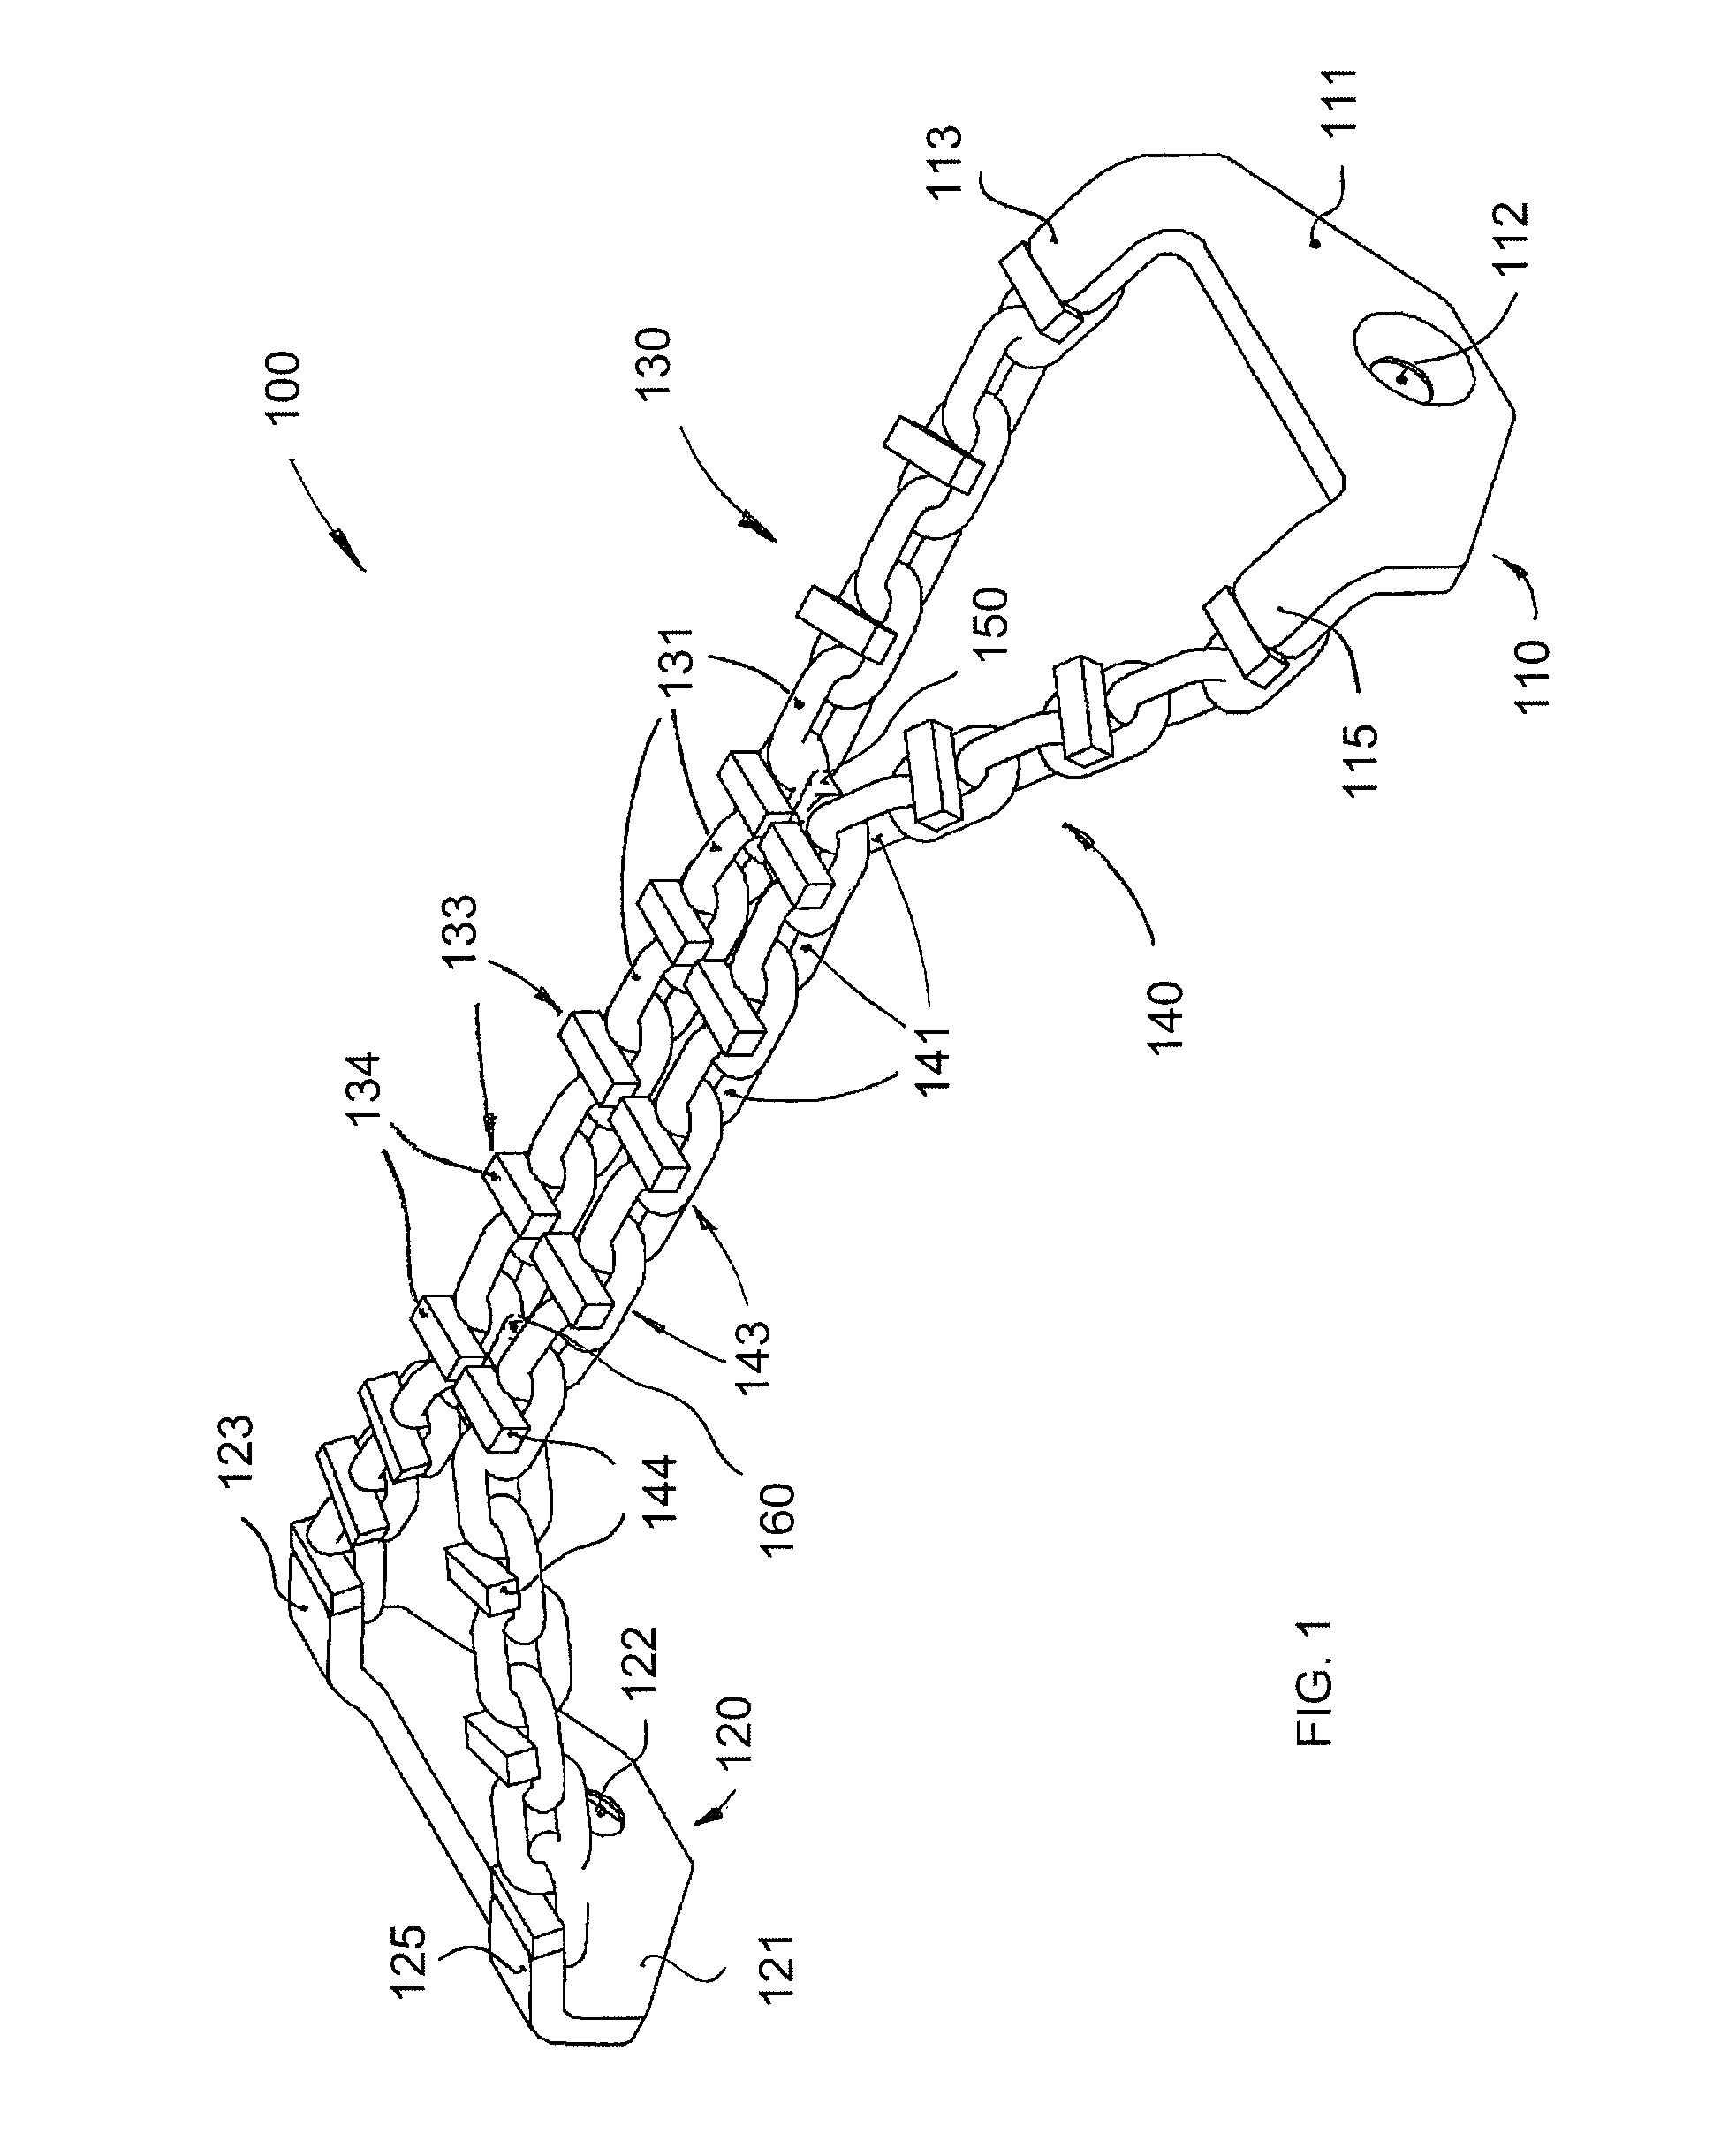 Traction chain assembly for elastomeric tracks